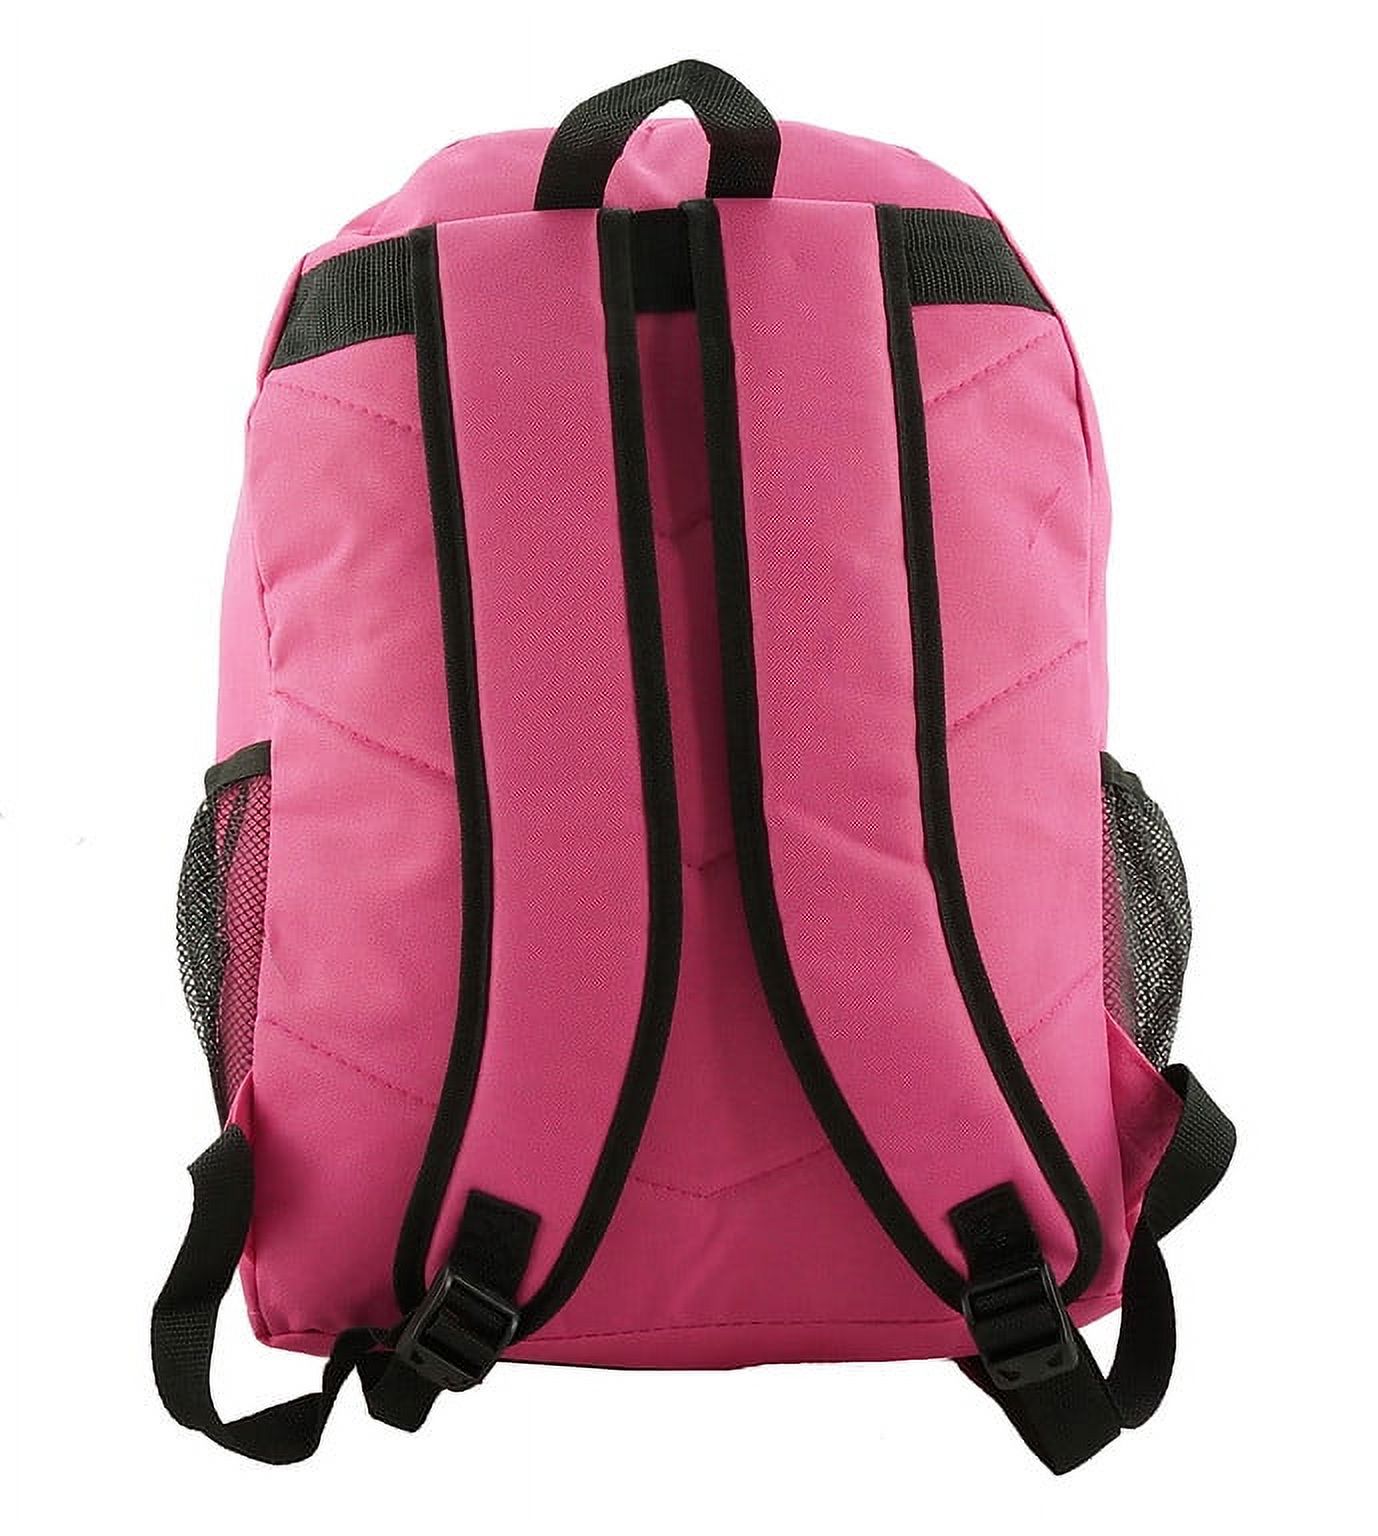 Classic Large Backpack for College Students and Kids, Lightweight Durable Travel Backpack Fits 15.6 Laptops Water Resistant Daypack Unisex Adjustable Padded Straps for Casual Everyday Use (Hot Pink) - image 3 of 4